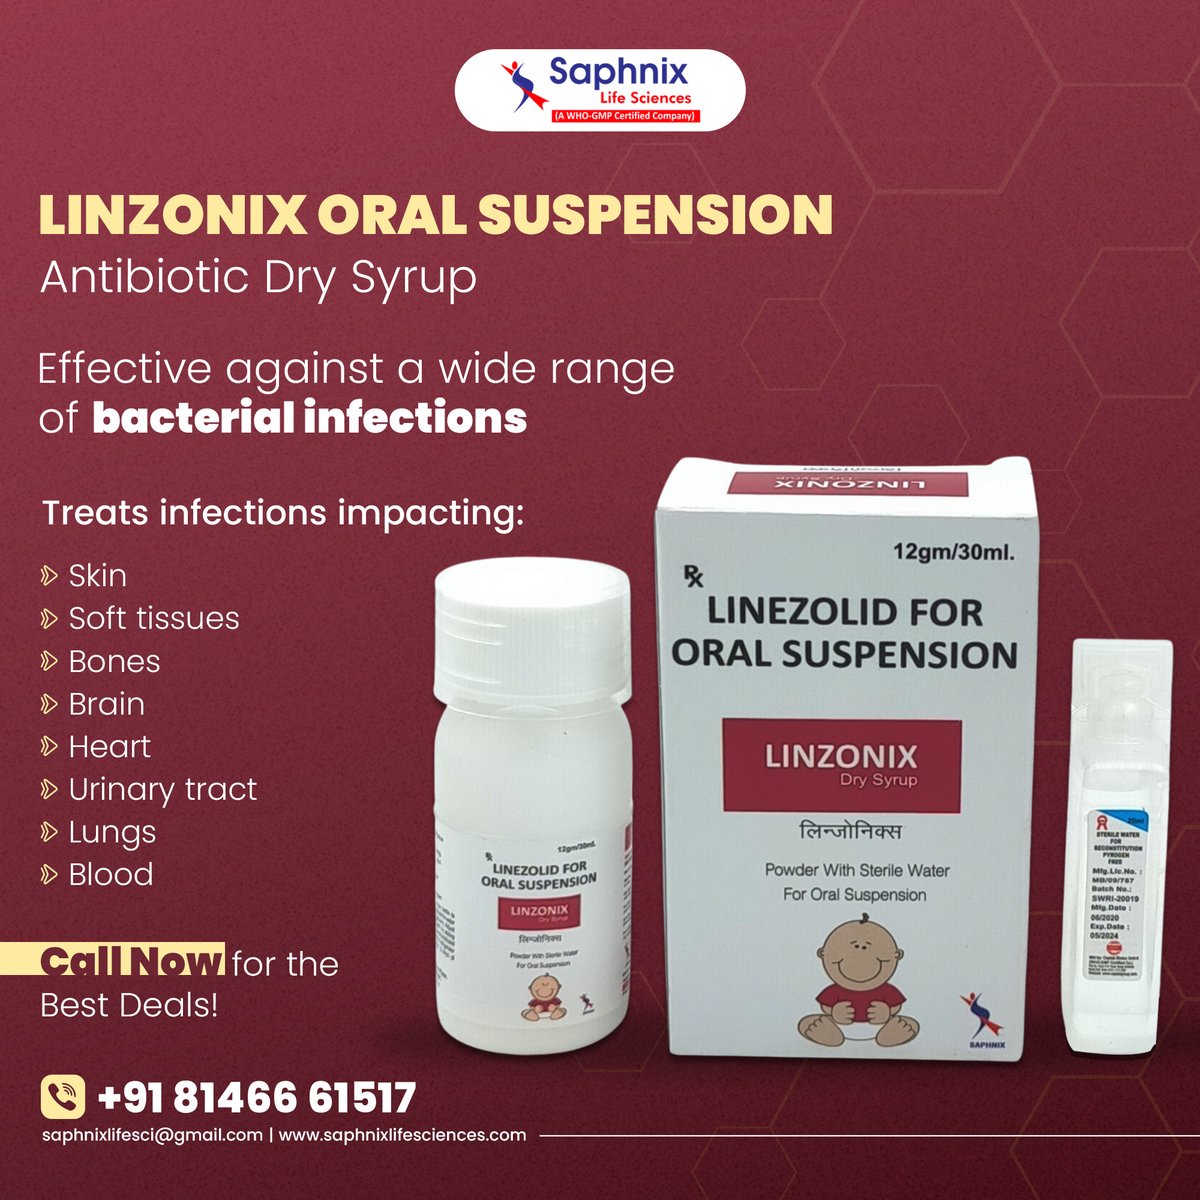 Introducing Linzonix Oral Suspension – Your Shield Against Resistant Infections. From skin to blood, trust in its potency for a healthier tomorrow. Call now!
☎️8146661517
🌐saphnixlifesciences.com
#saphnixlifesciences #Suspension #supplement #healthsupplement #healthcareproduct